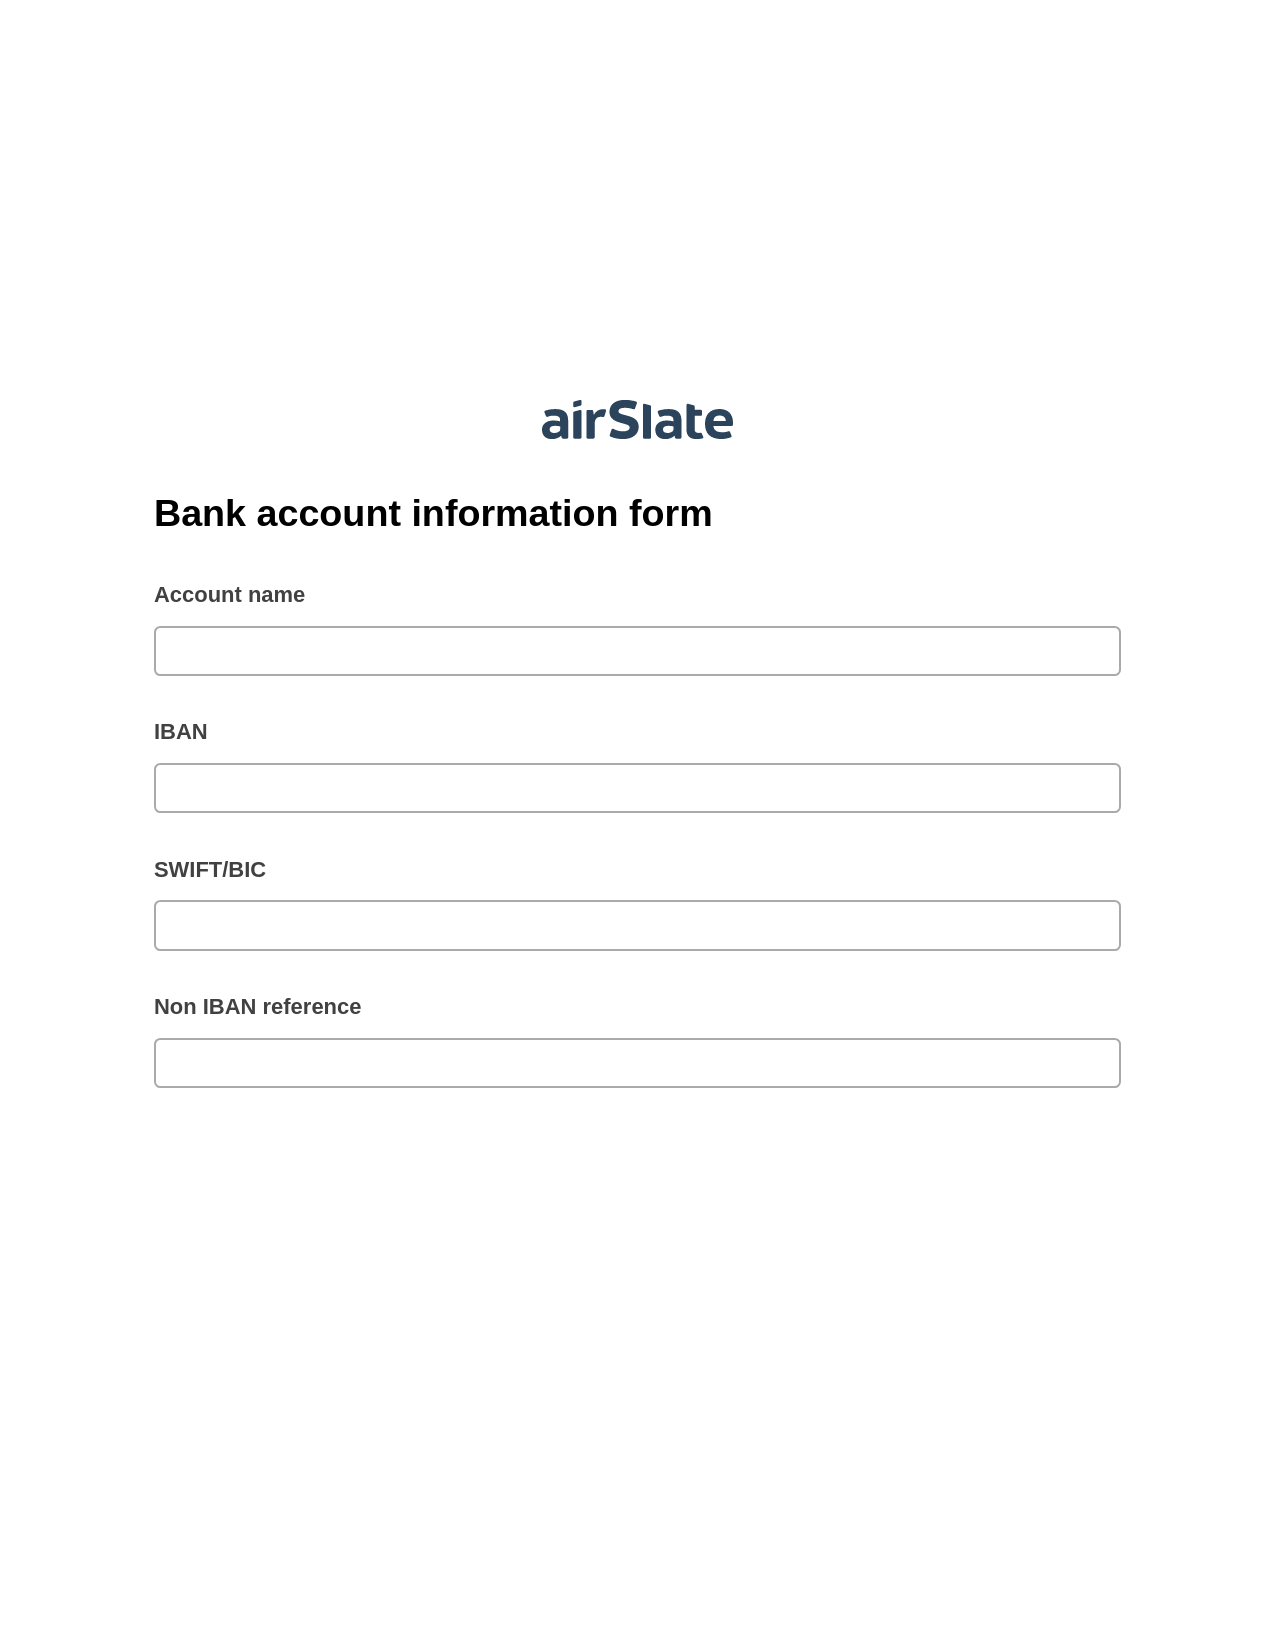 Bank account information form Pre-fill from MySQL Dropdown Options Bot, Pre-fill with Custom Data Bot, Export to Excel 365 Bot